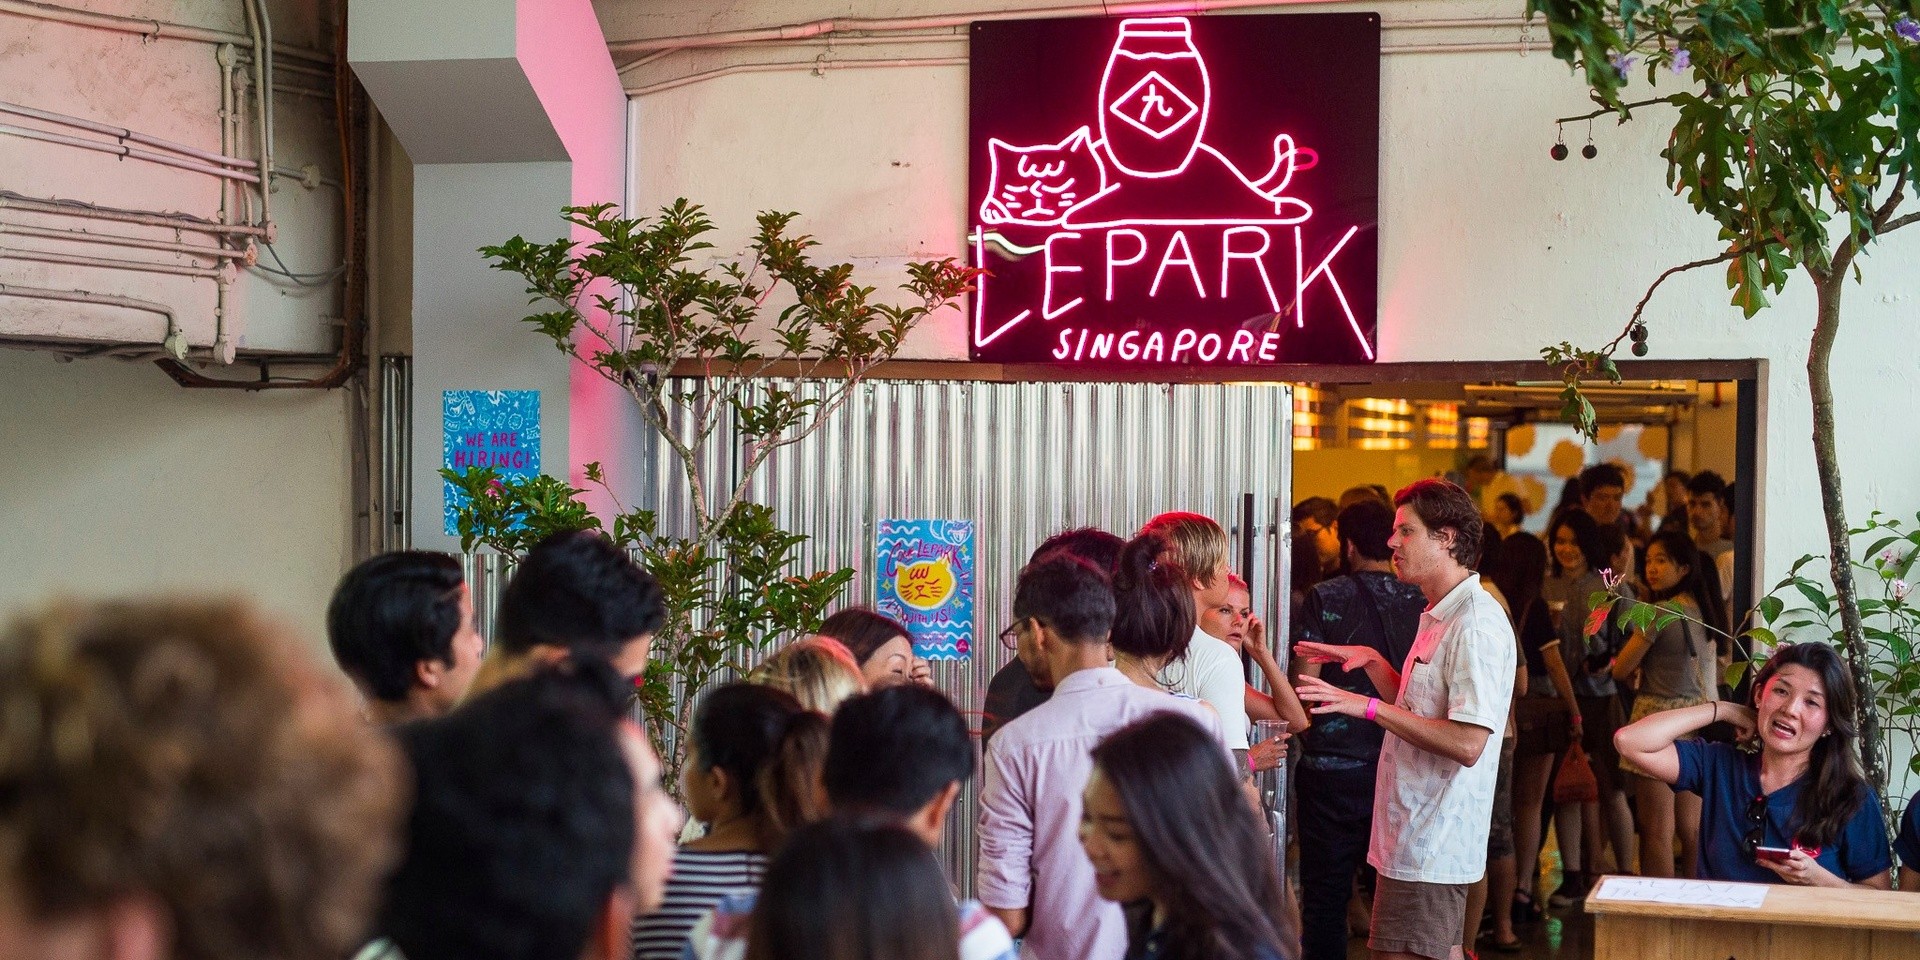 Lepark closing its doors at the end of September